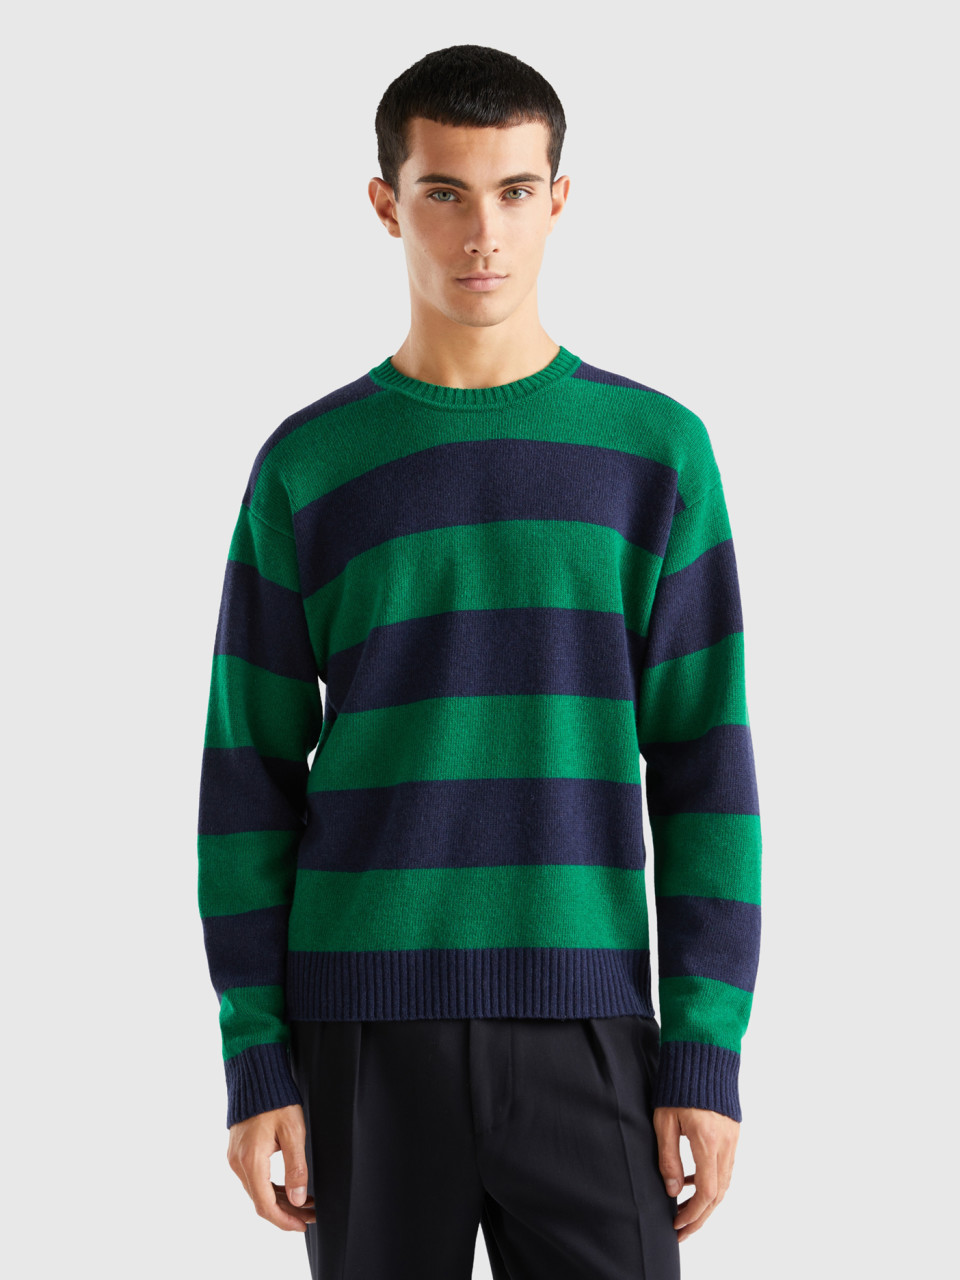 Benetton, Sweater With Two-tone Stripes, Green, Men